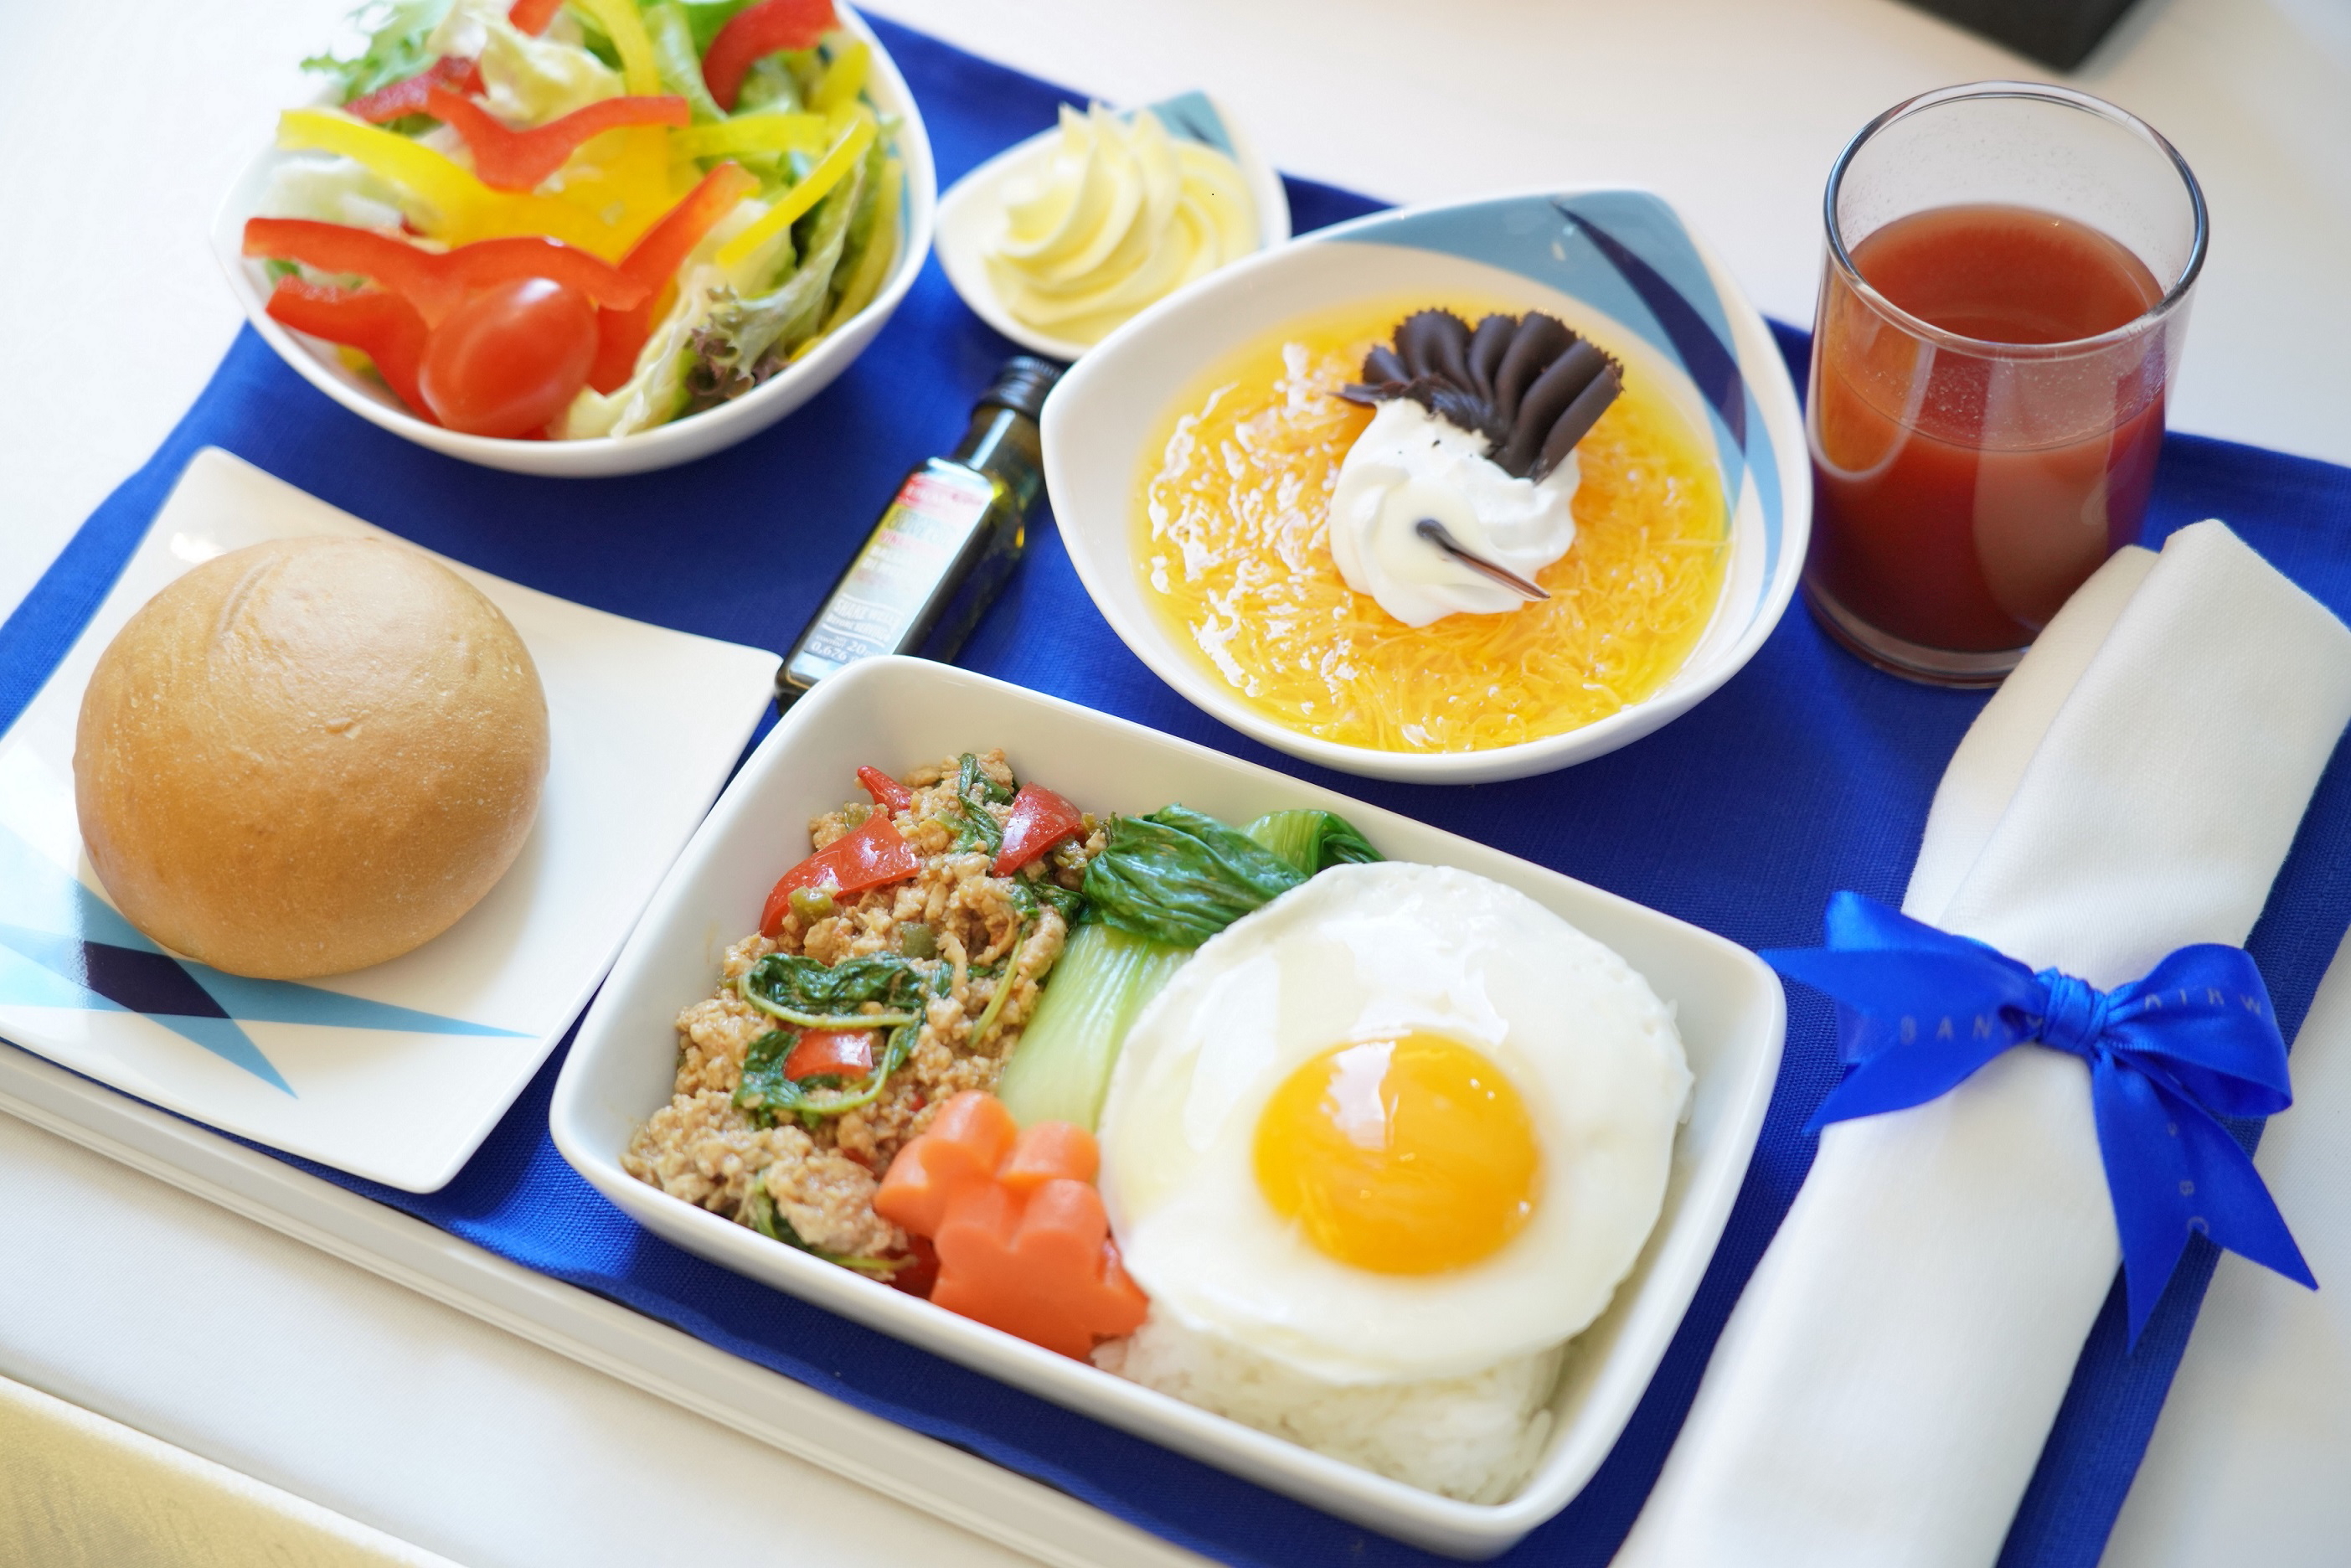 Bangkok Airways has enhanced its inflight food service with “Boutique Street Food” menus. The new menus will be available on all Bangkok Airways flights, domestic and international, originating from Suvarnabhumi, Samui and Phuket Airports. Click to enlarge.